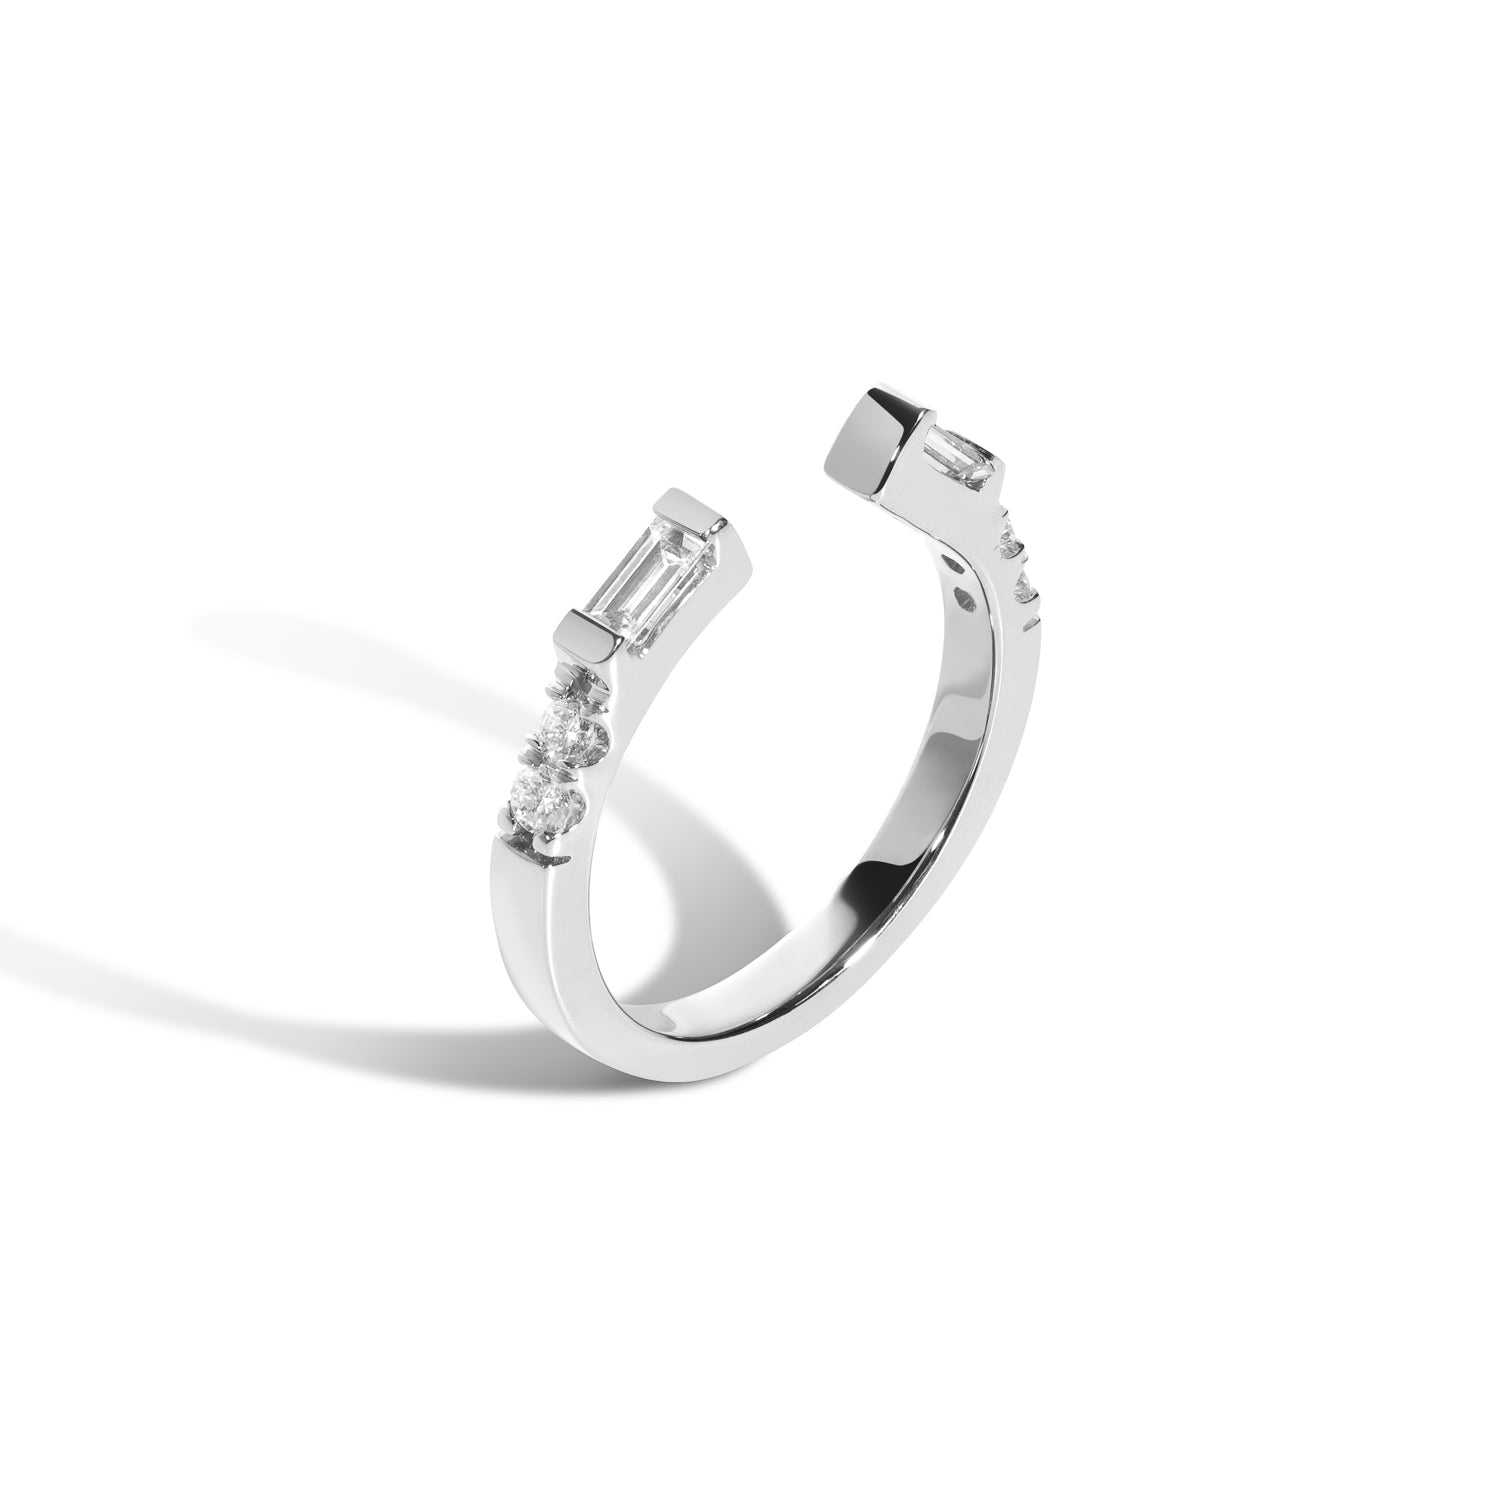 Shahla Karimi Jewelry 14K White Gold or Platinum Rockefeller No.2 Open Ring with Diamond Baguettes and White Diamonds